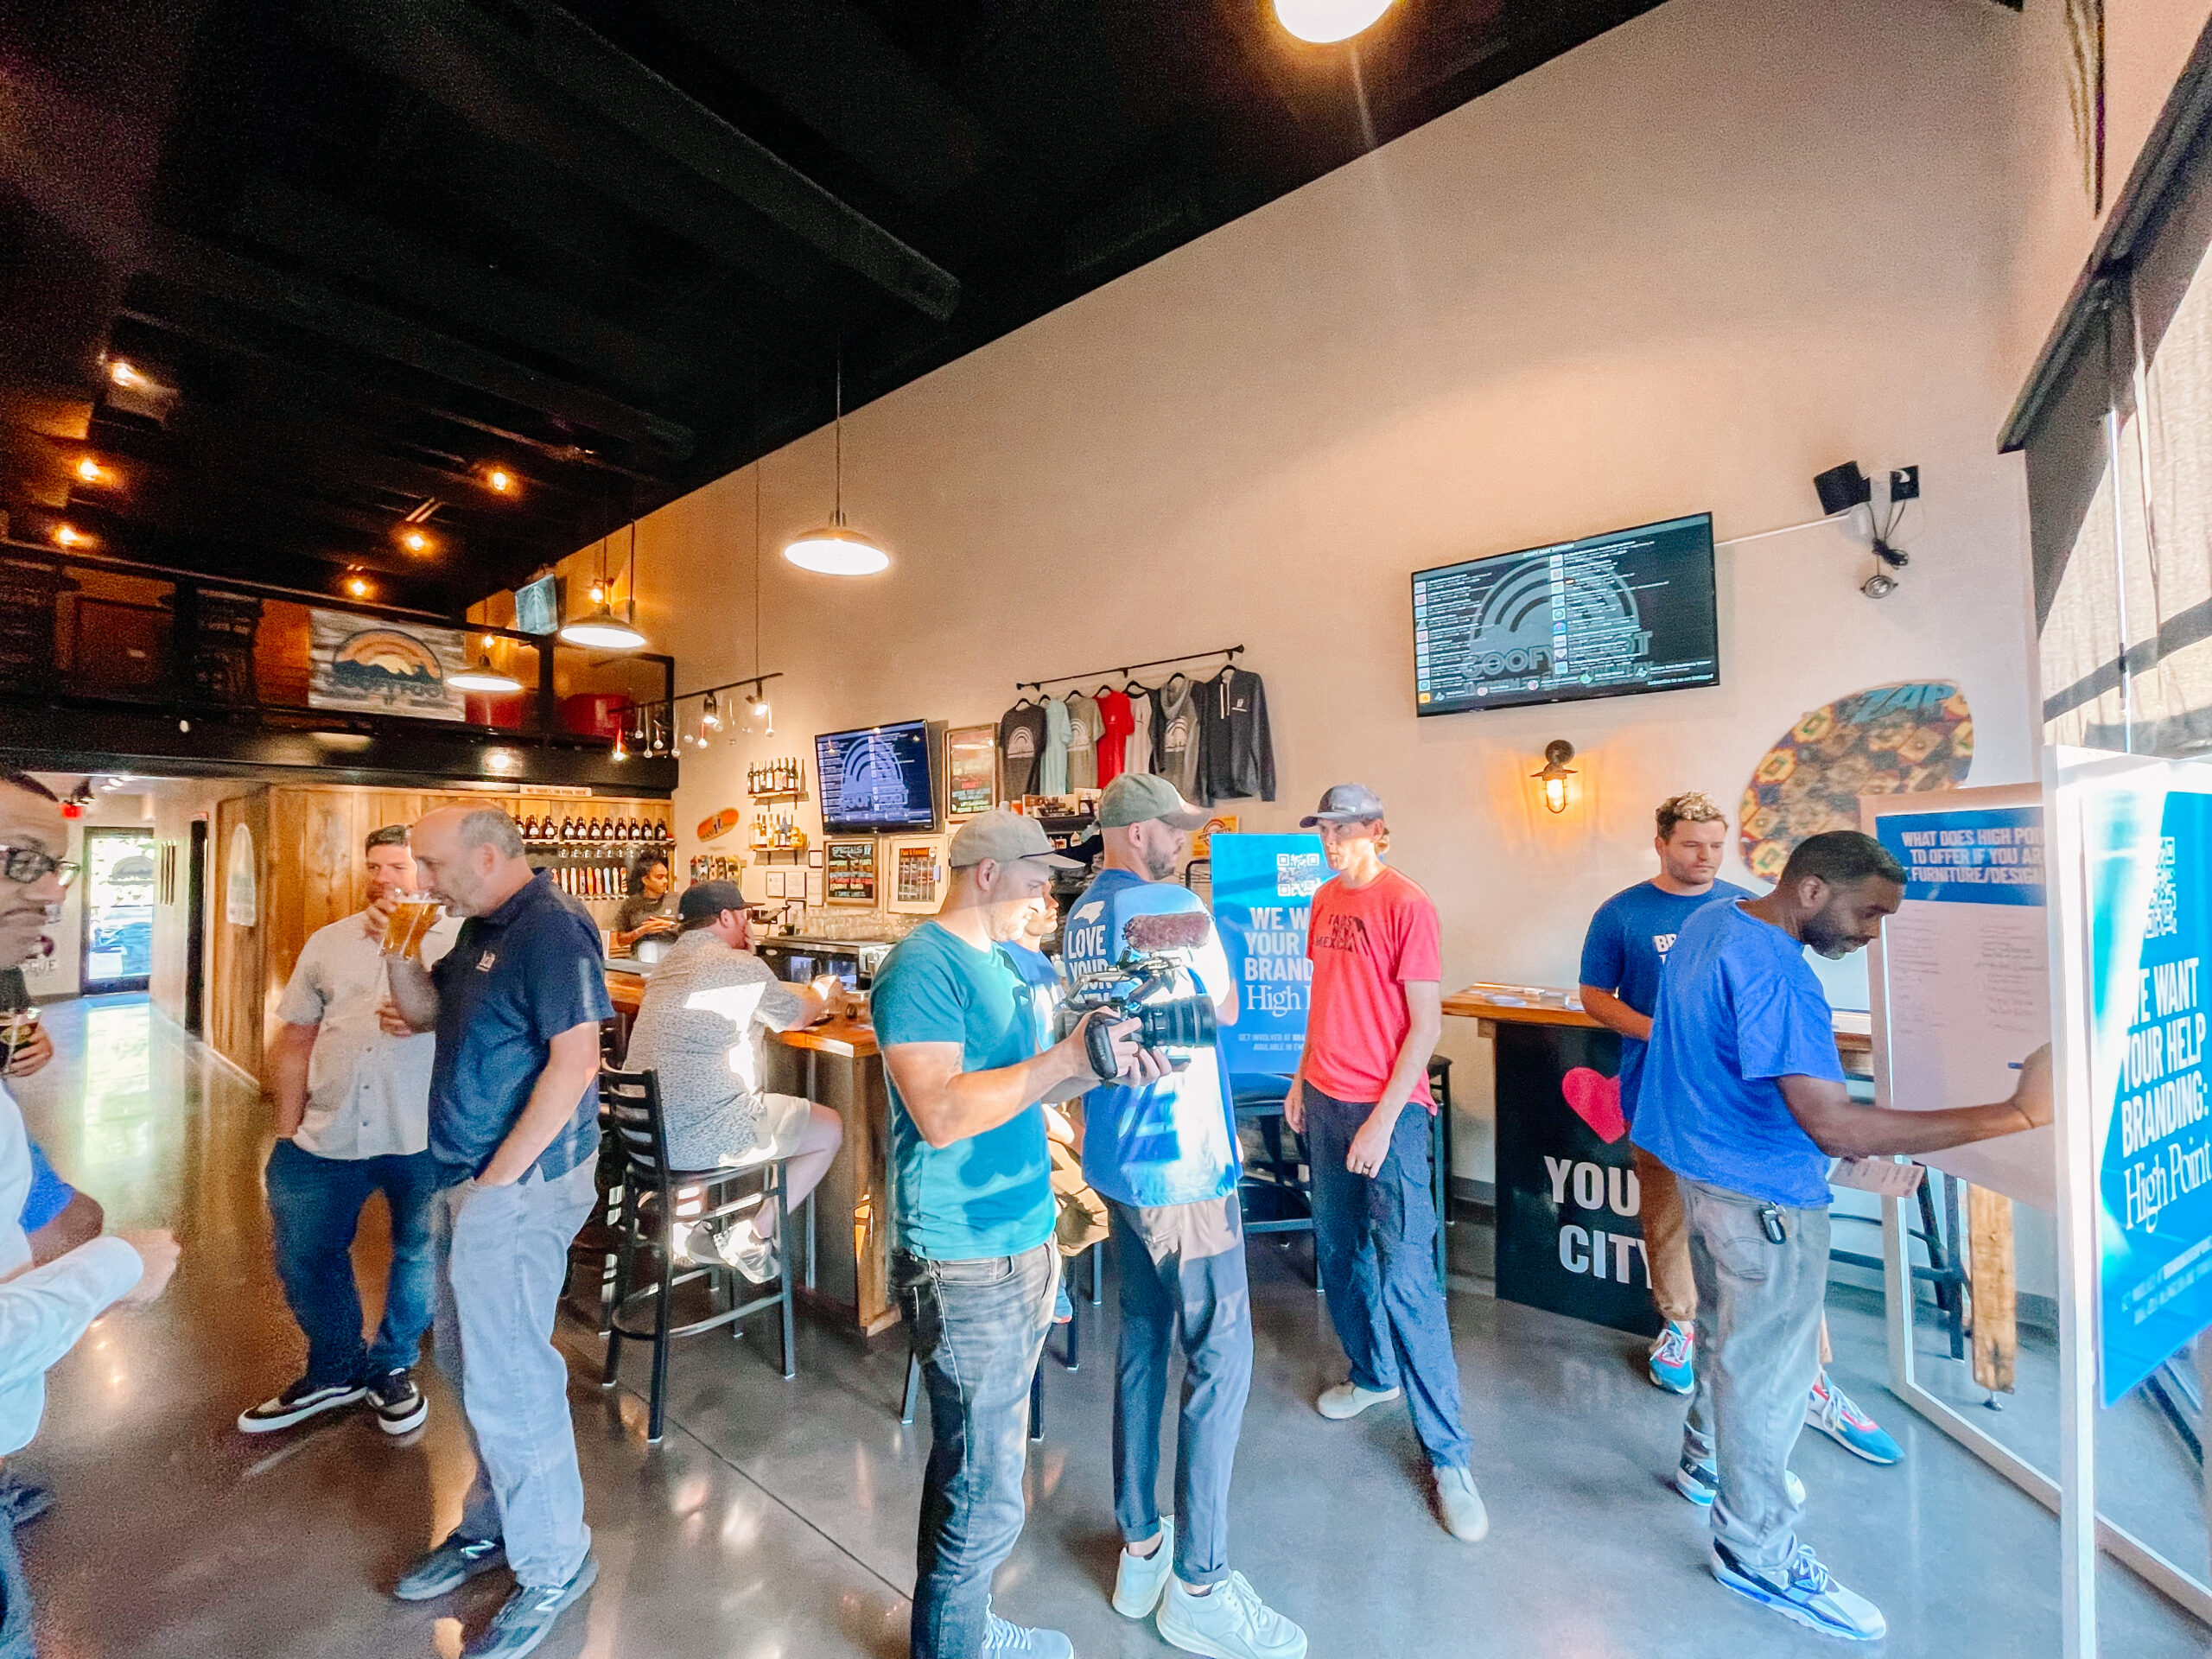 An Activation Event by the City of High Point and CivicBrand at Goofy Foot Taproom in High Point, NC.